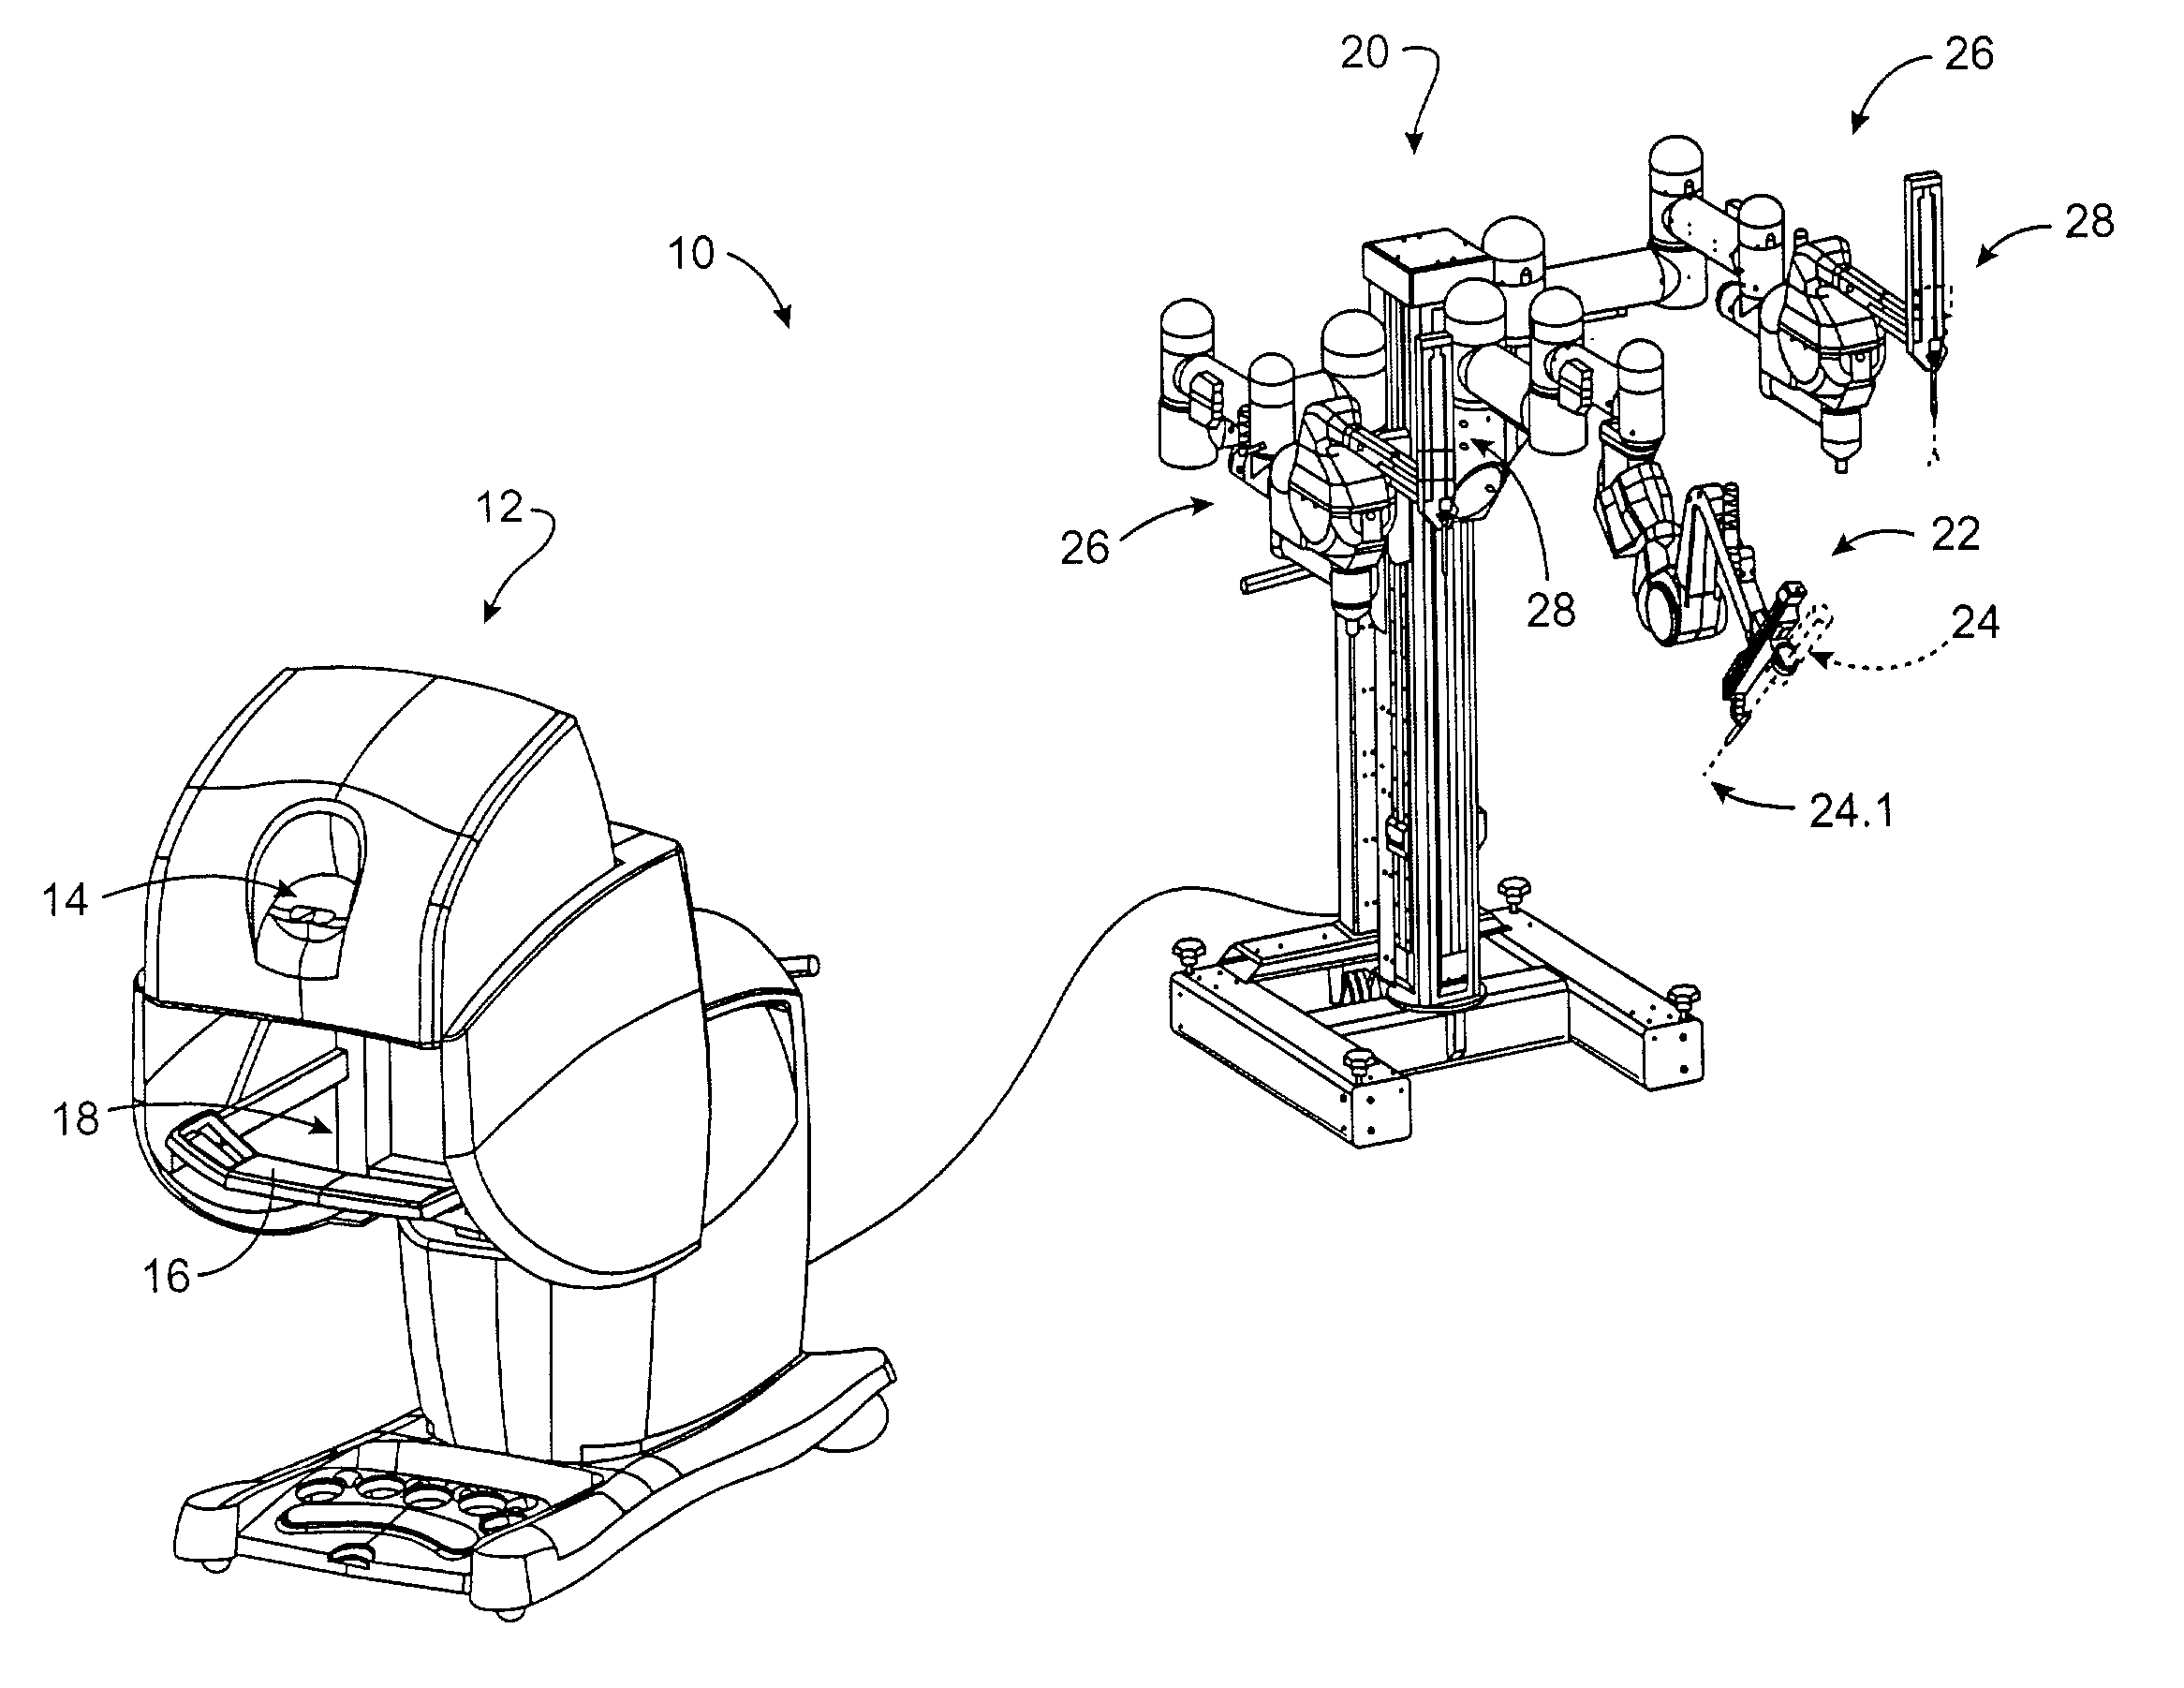 Devices and methods for presenting and regulating auxiliary information on an image display of a telesurgical system to assist an operator in performing a surgical procedure